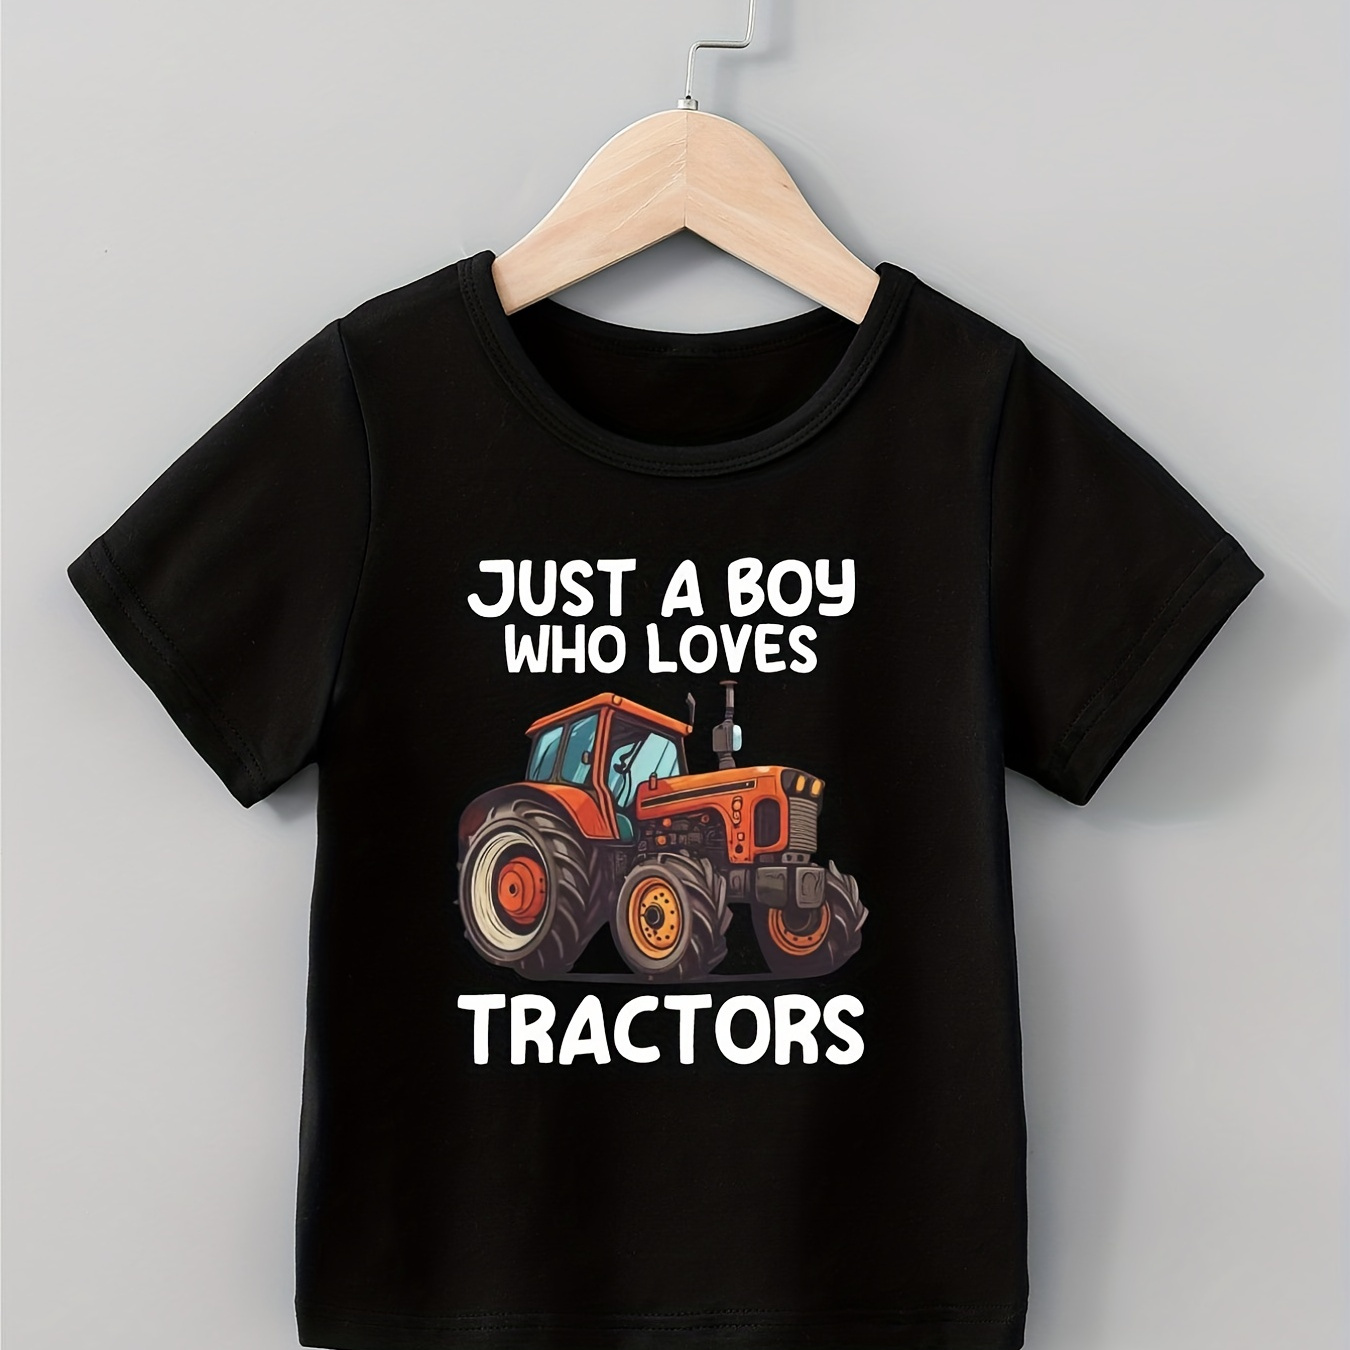 

Boys Creative T-shirt, Lightweight Comfy Short Sleeve Tops, Tractors Graphic Tees For Unisex Toddlers Summer, Kids Clothings